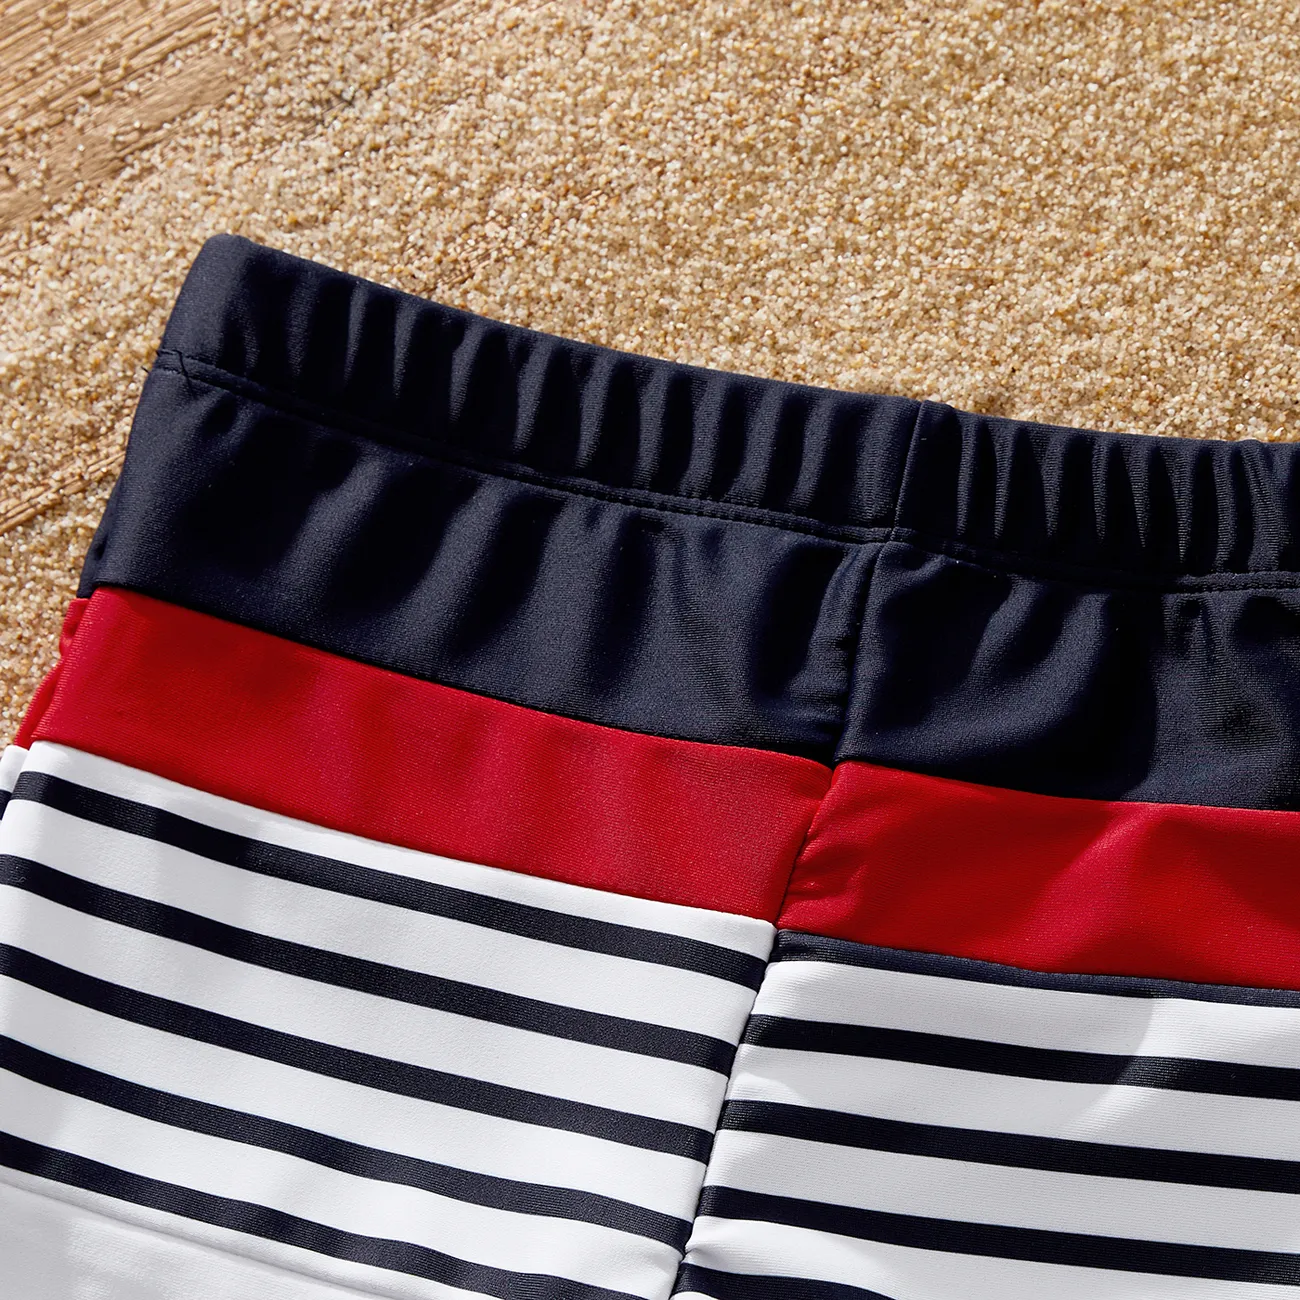 Family Matching Striped Print One-piece Swimsuit or Swim Trunks Shorts MultiColour big image 1